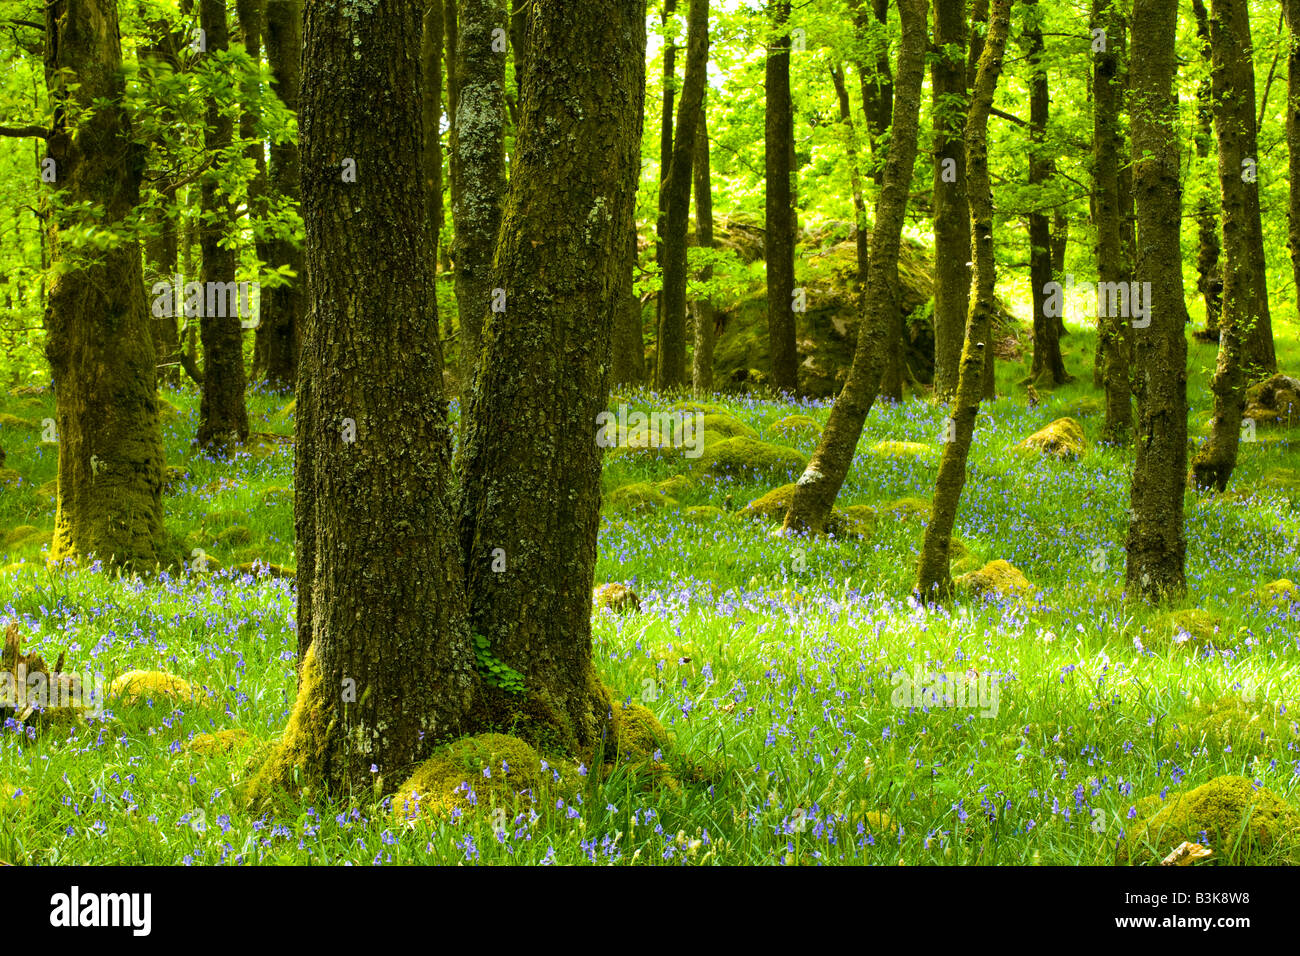 England Cumbria Lake District National Park A blanket of flowering Bluebells growing in woodland in Dunnerdale Forest. Stock Photo